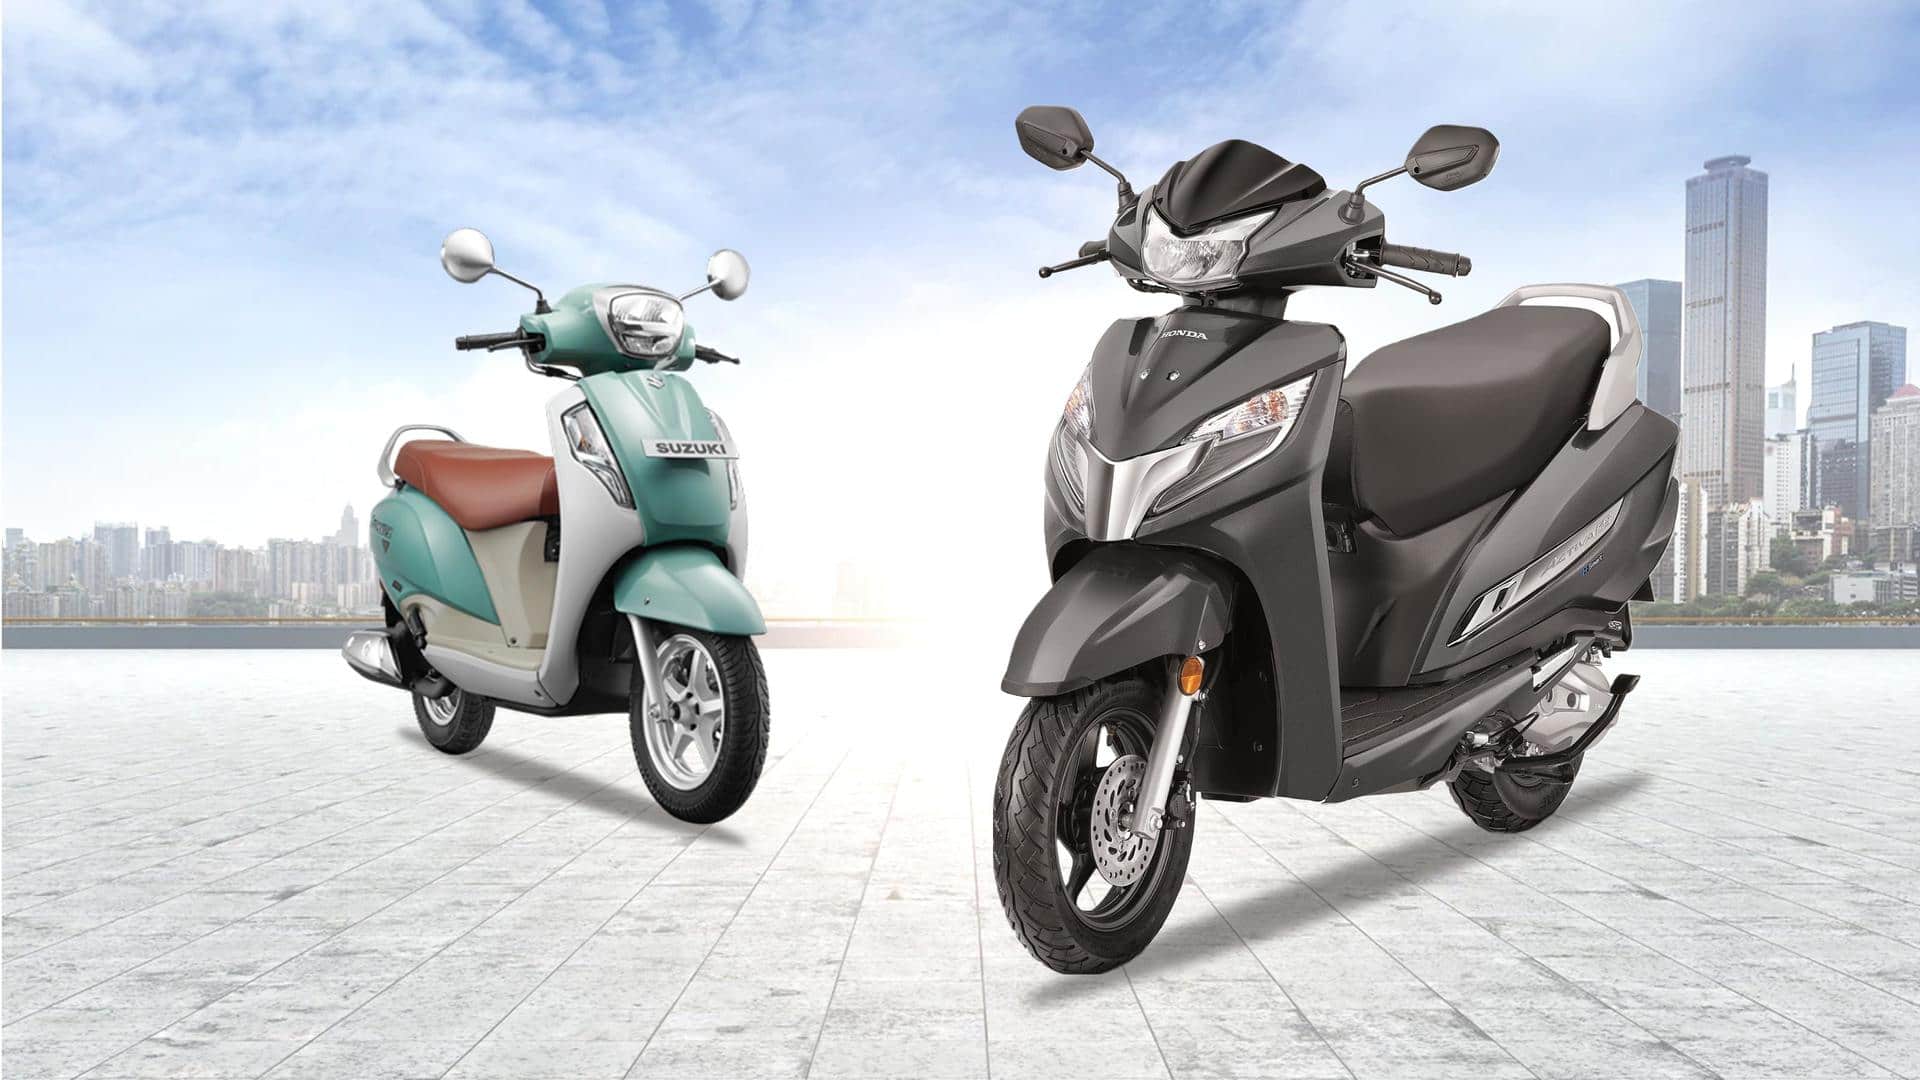 Honda Activa 125 v/s Access 125: Which scooter is better